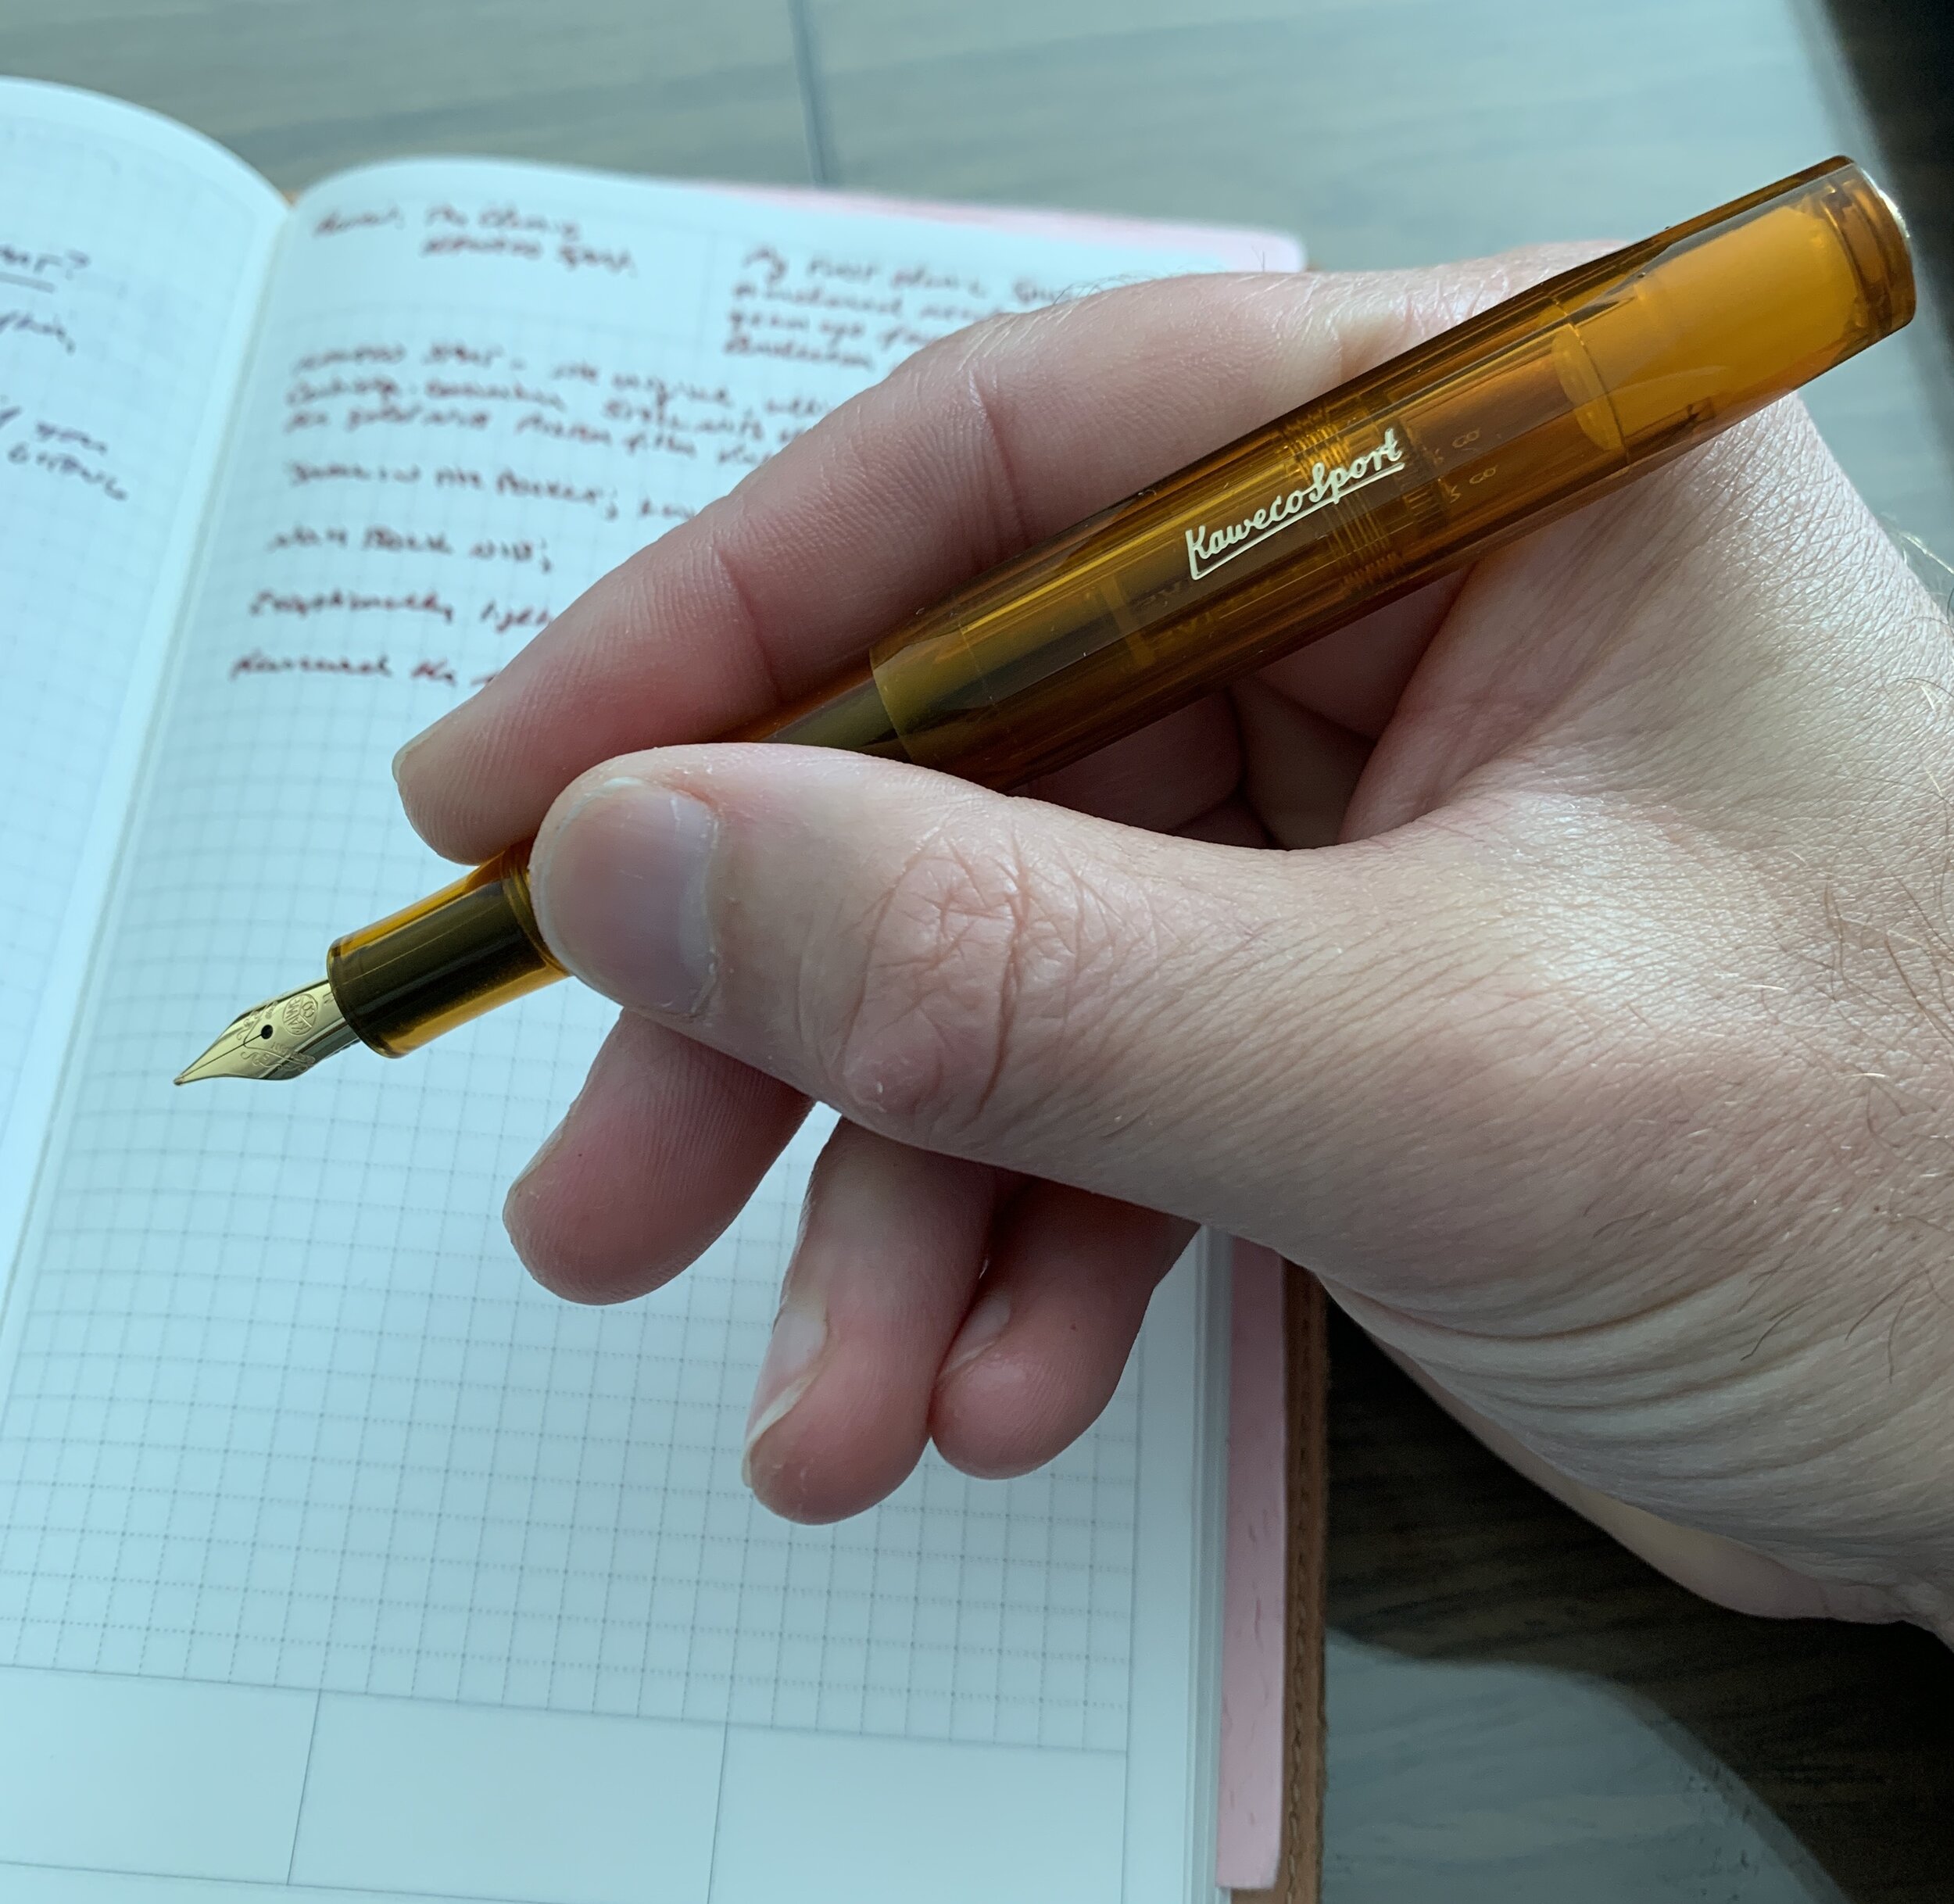 Review: Kaweco Leather Pen Holder - The Well-Appointed Desk